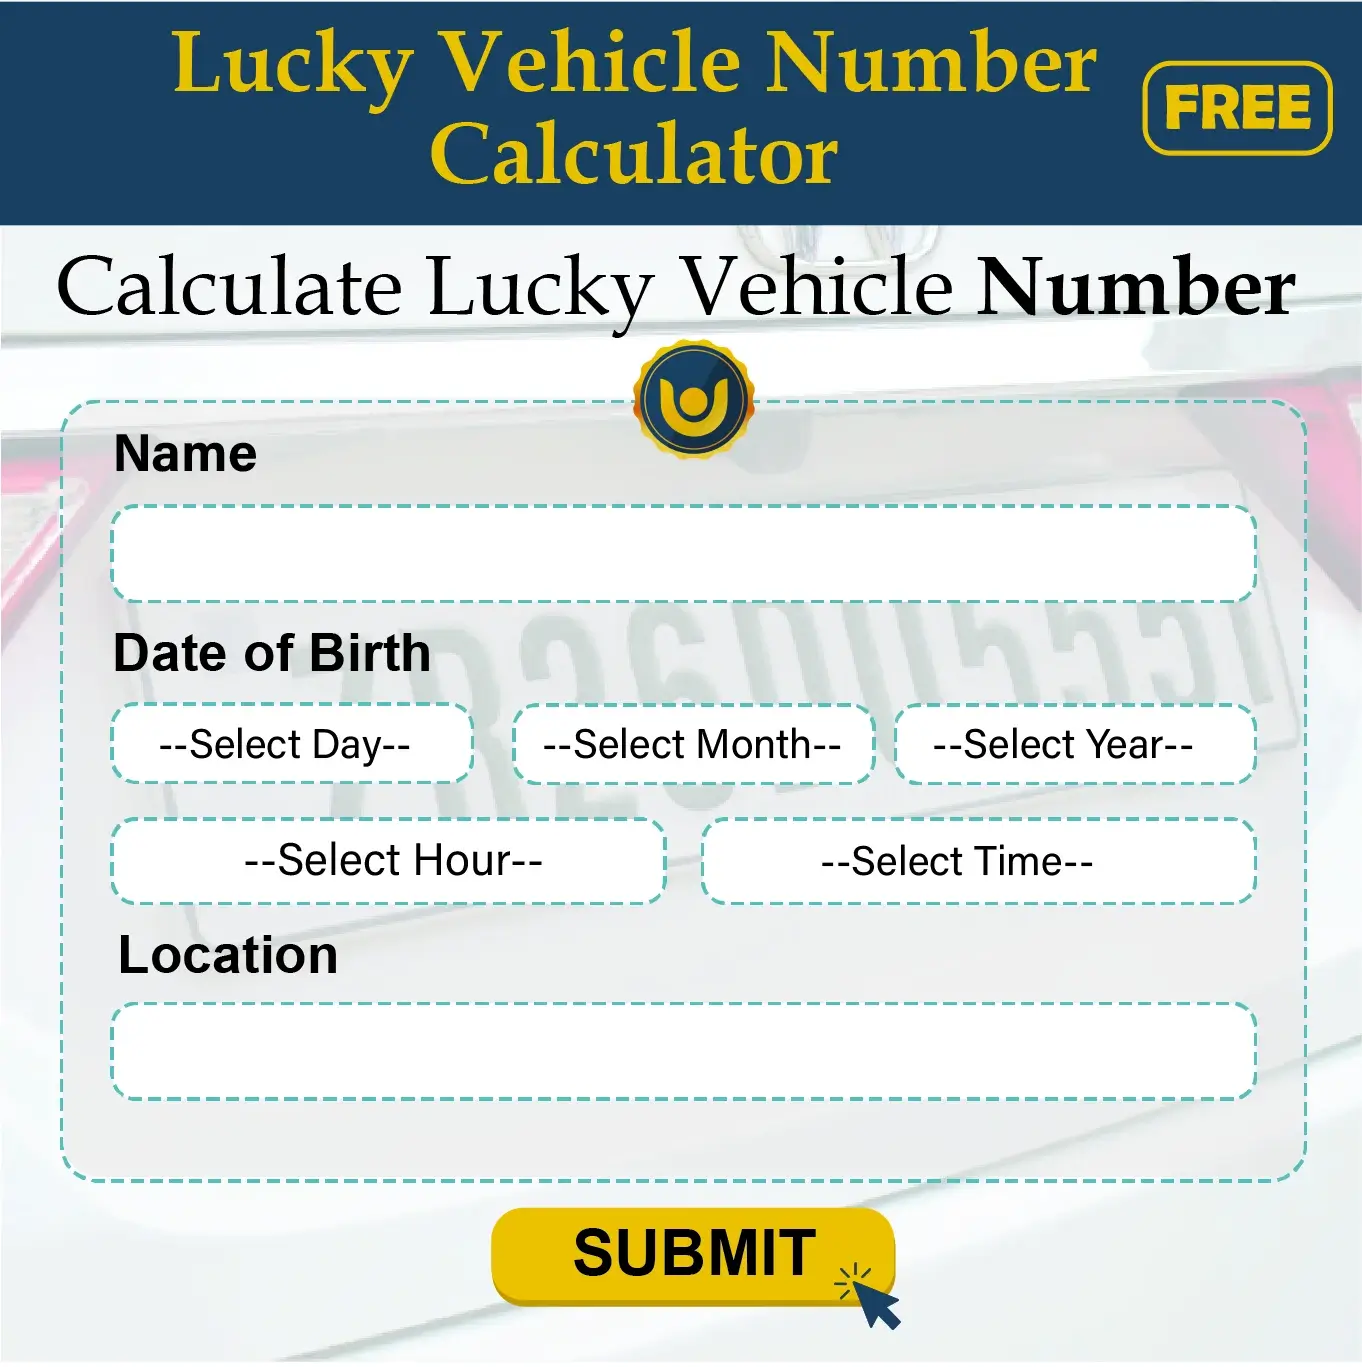 Lucky Vehicle Number Calculator